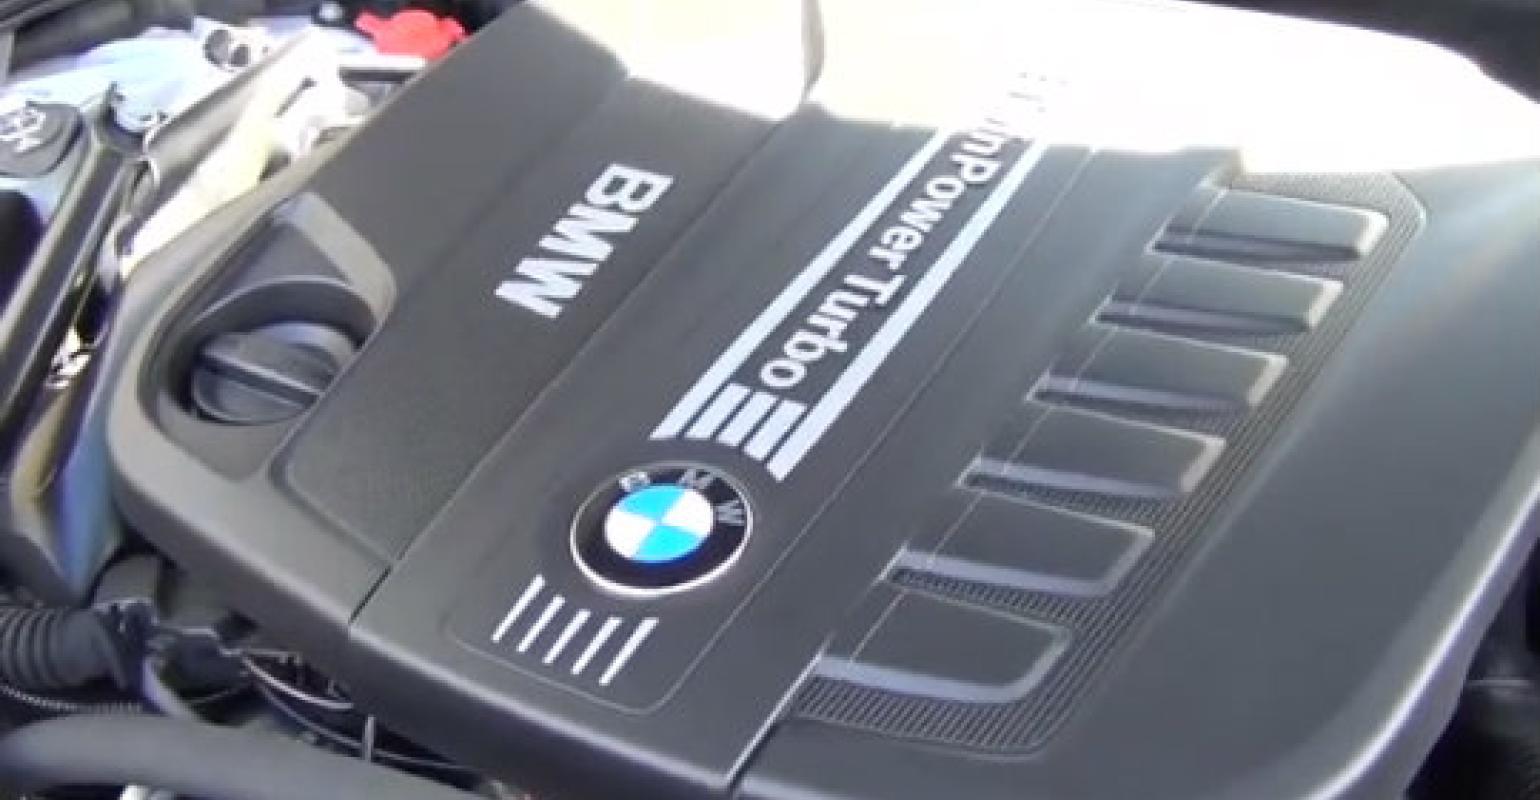 BMW 535d Test Drive for Ward&#039;s 10 Best Engines of 2014